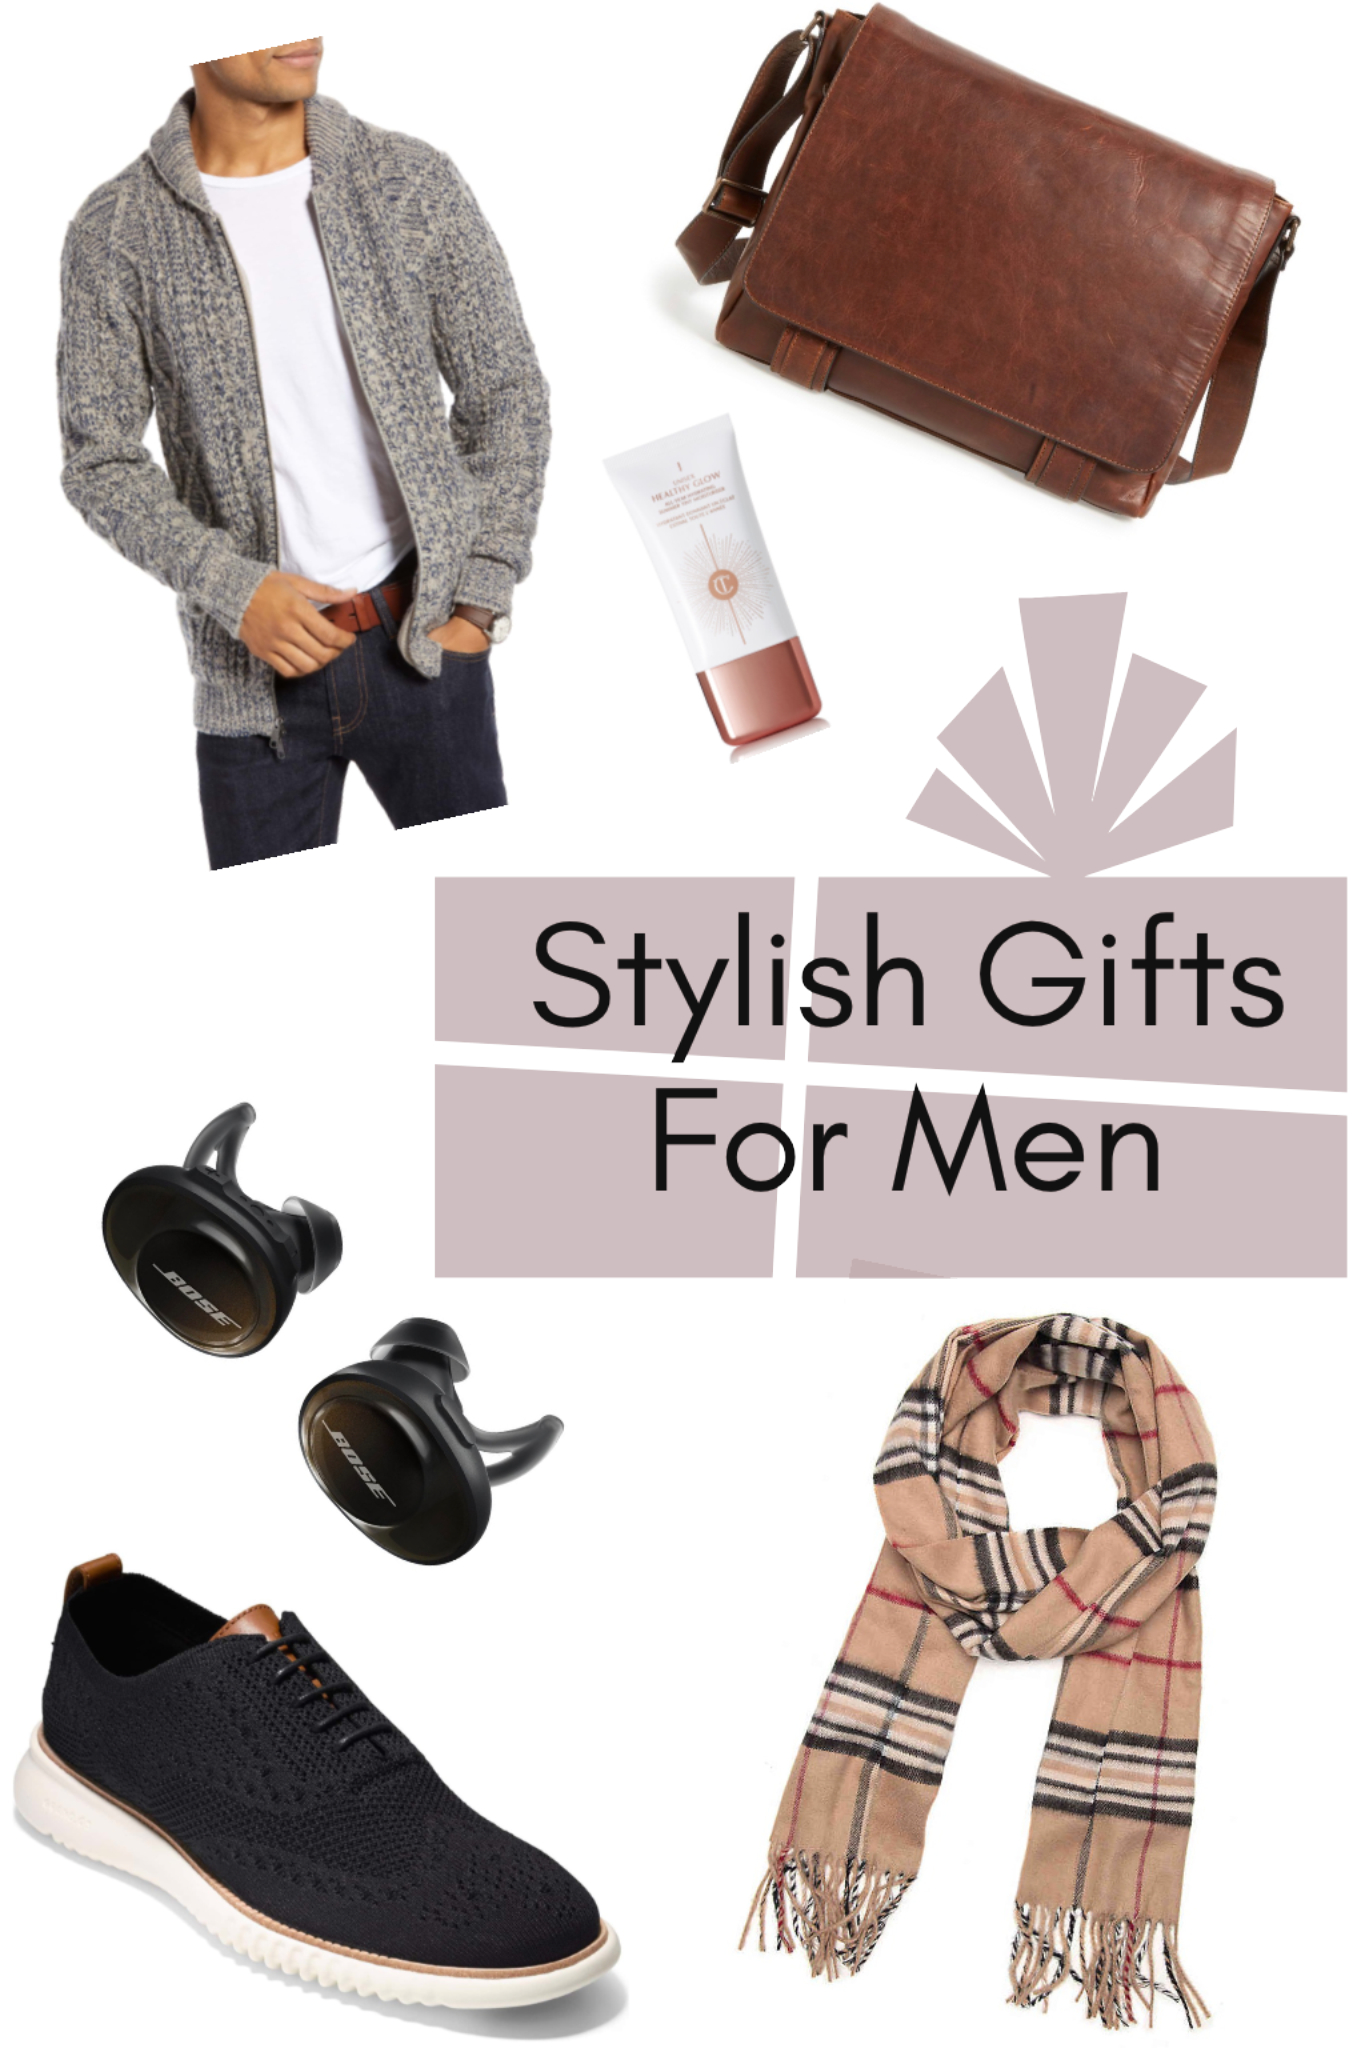 What to Get For Stylish Men | fashionable Gifts For Men Who like Fashion. Holiday gift guide by popular North Carolina fashion and lifestyle blogger Jessica Linn, from Linn Style.